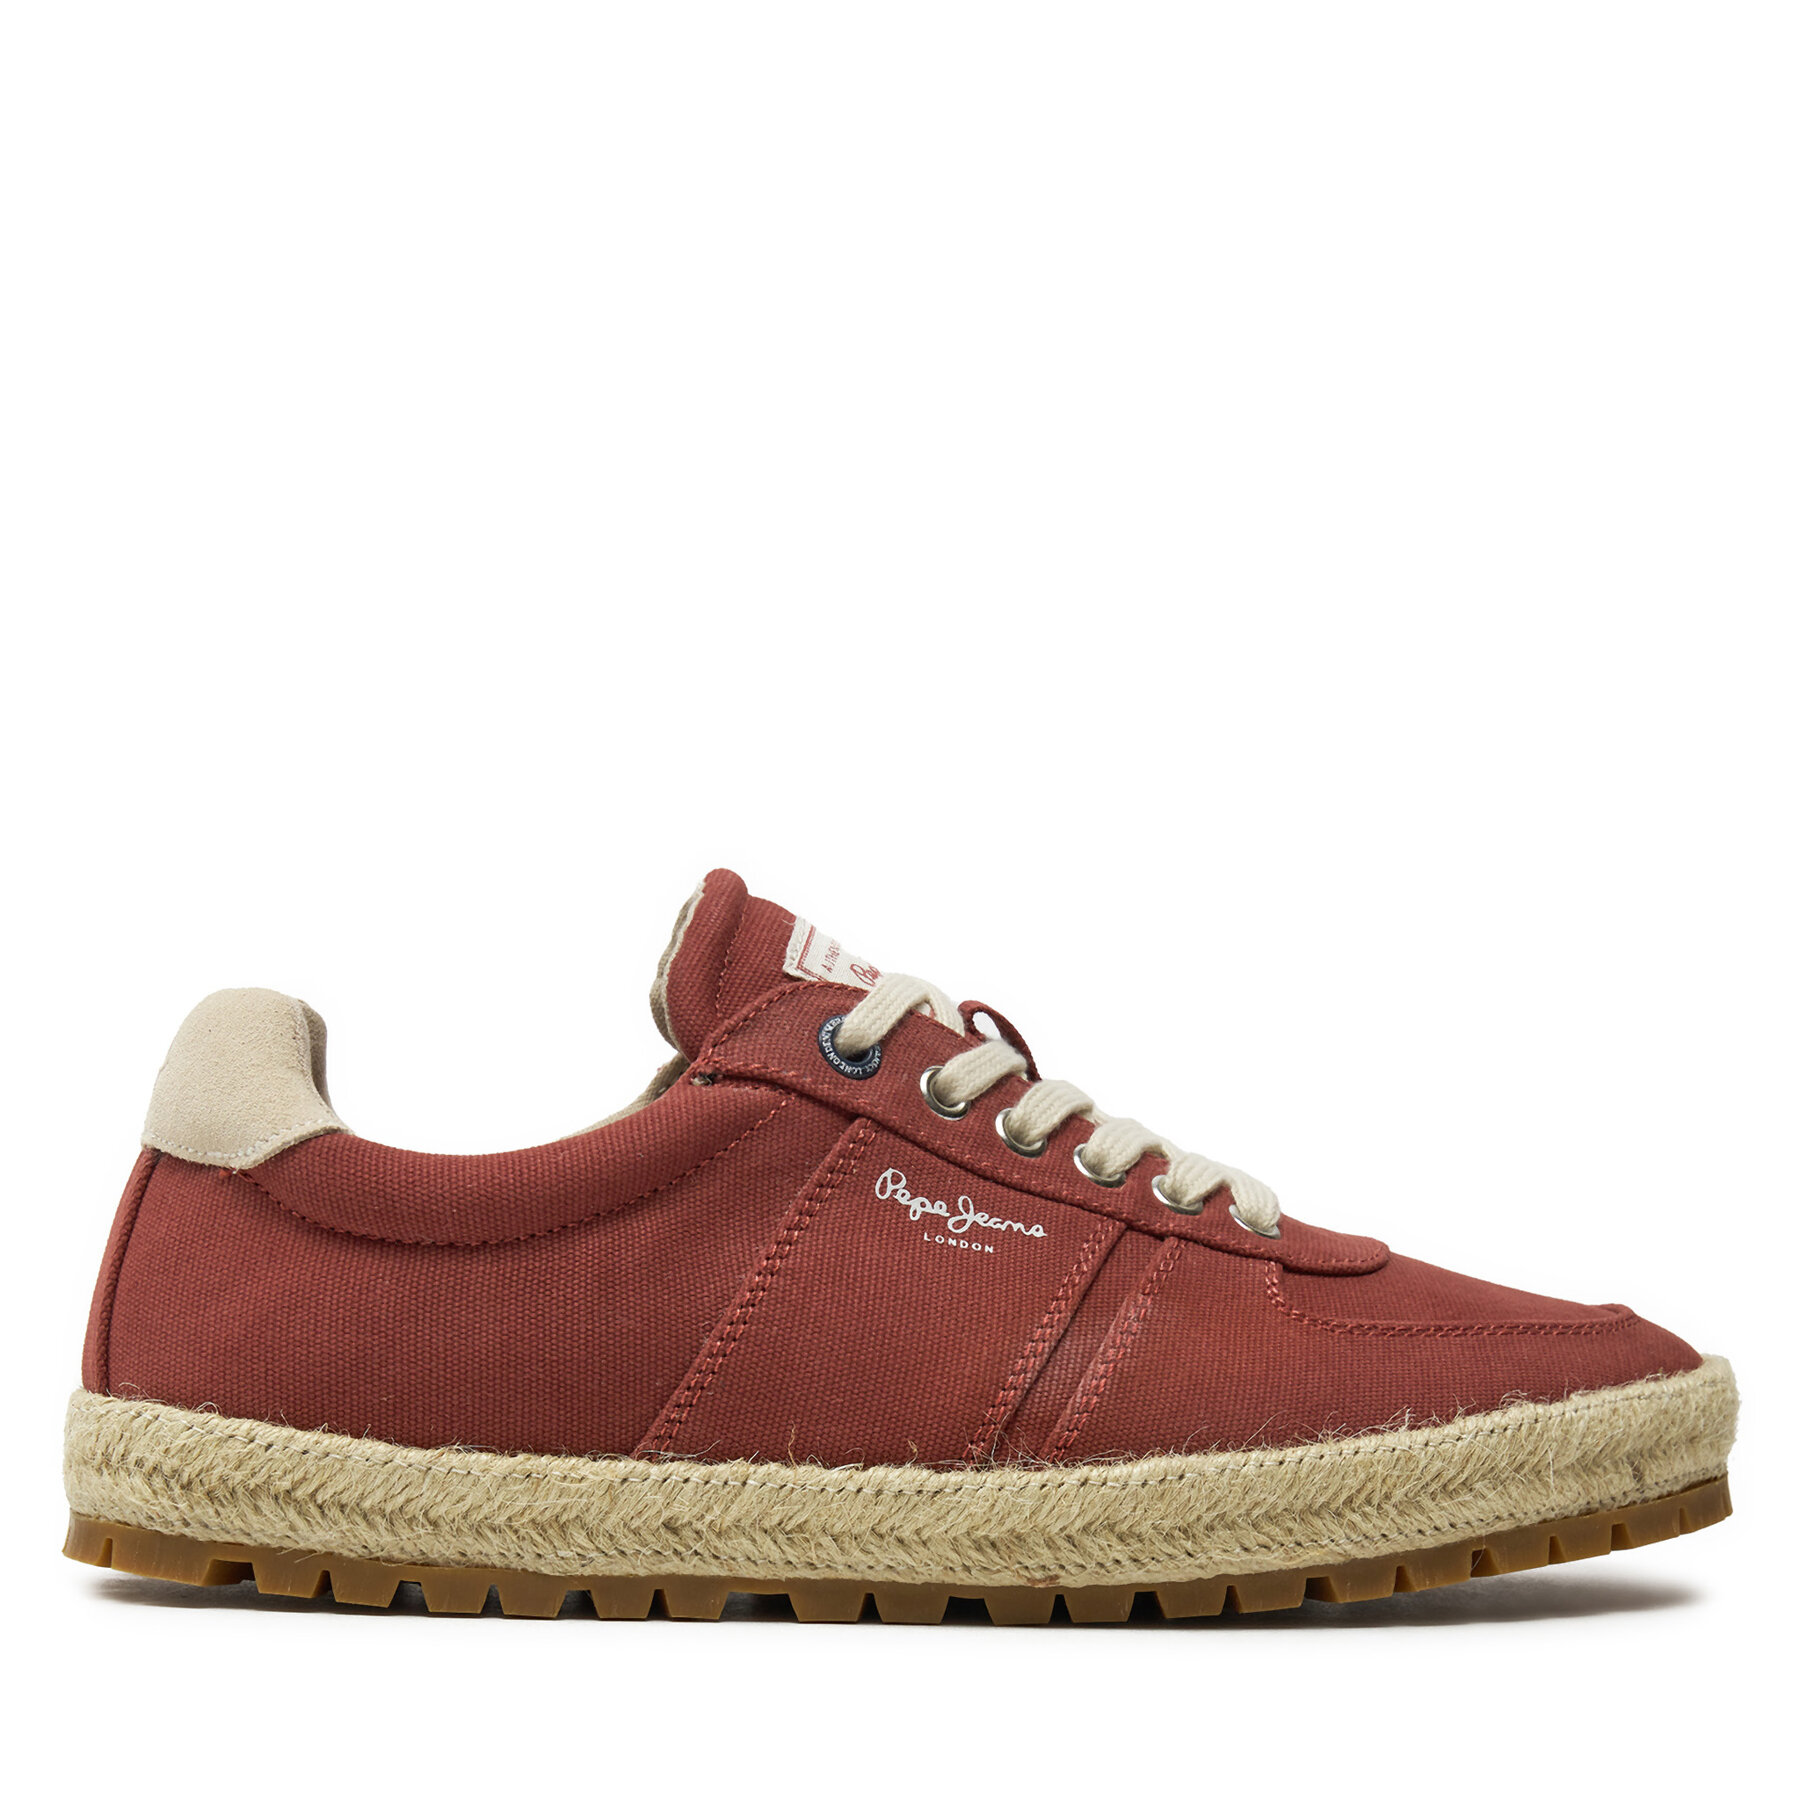 Sneakers Pepe Jeans Drenan Sporty PMS10323 Ruby Wine Red 293 von Pepe Jeans